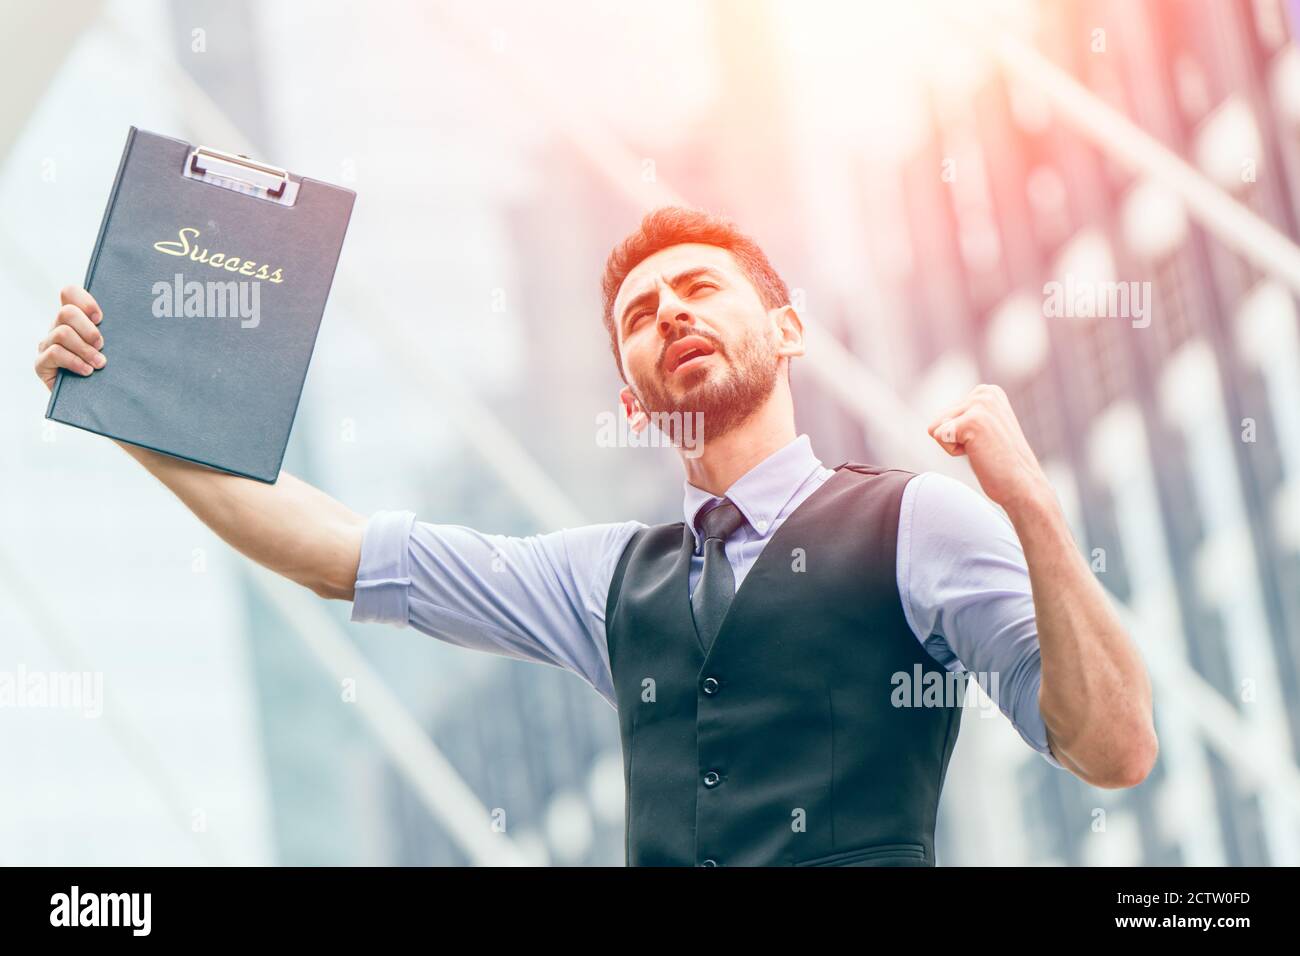 Successful latin businessman glad expression hand rising outdoors at business office outdoors. Stock Photo